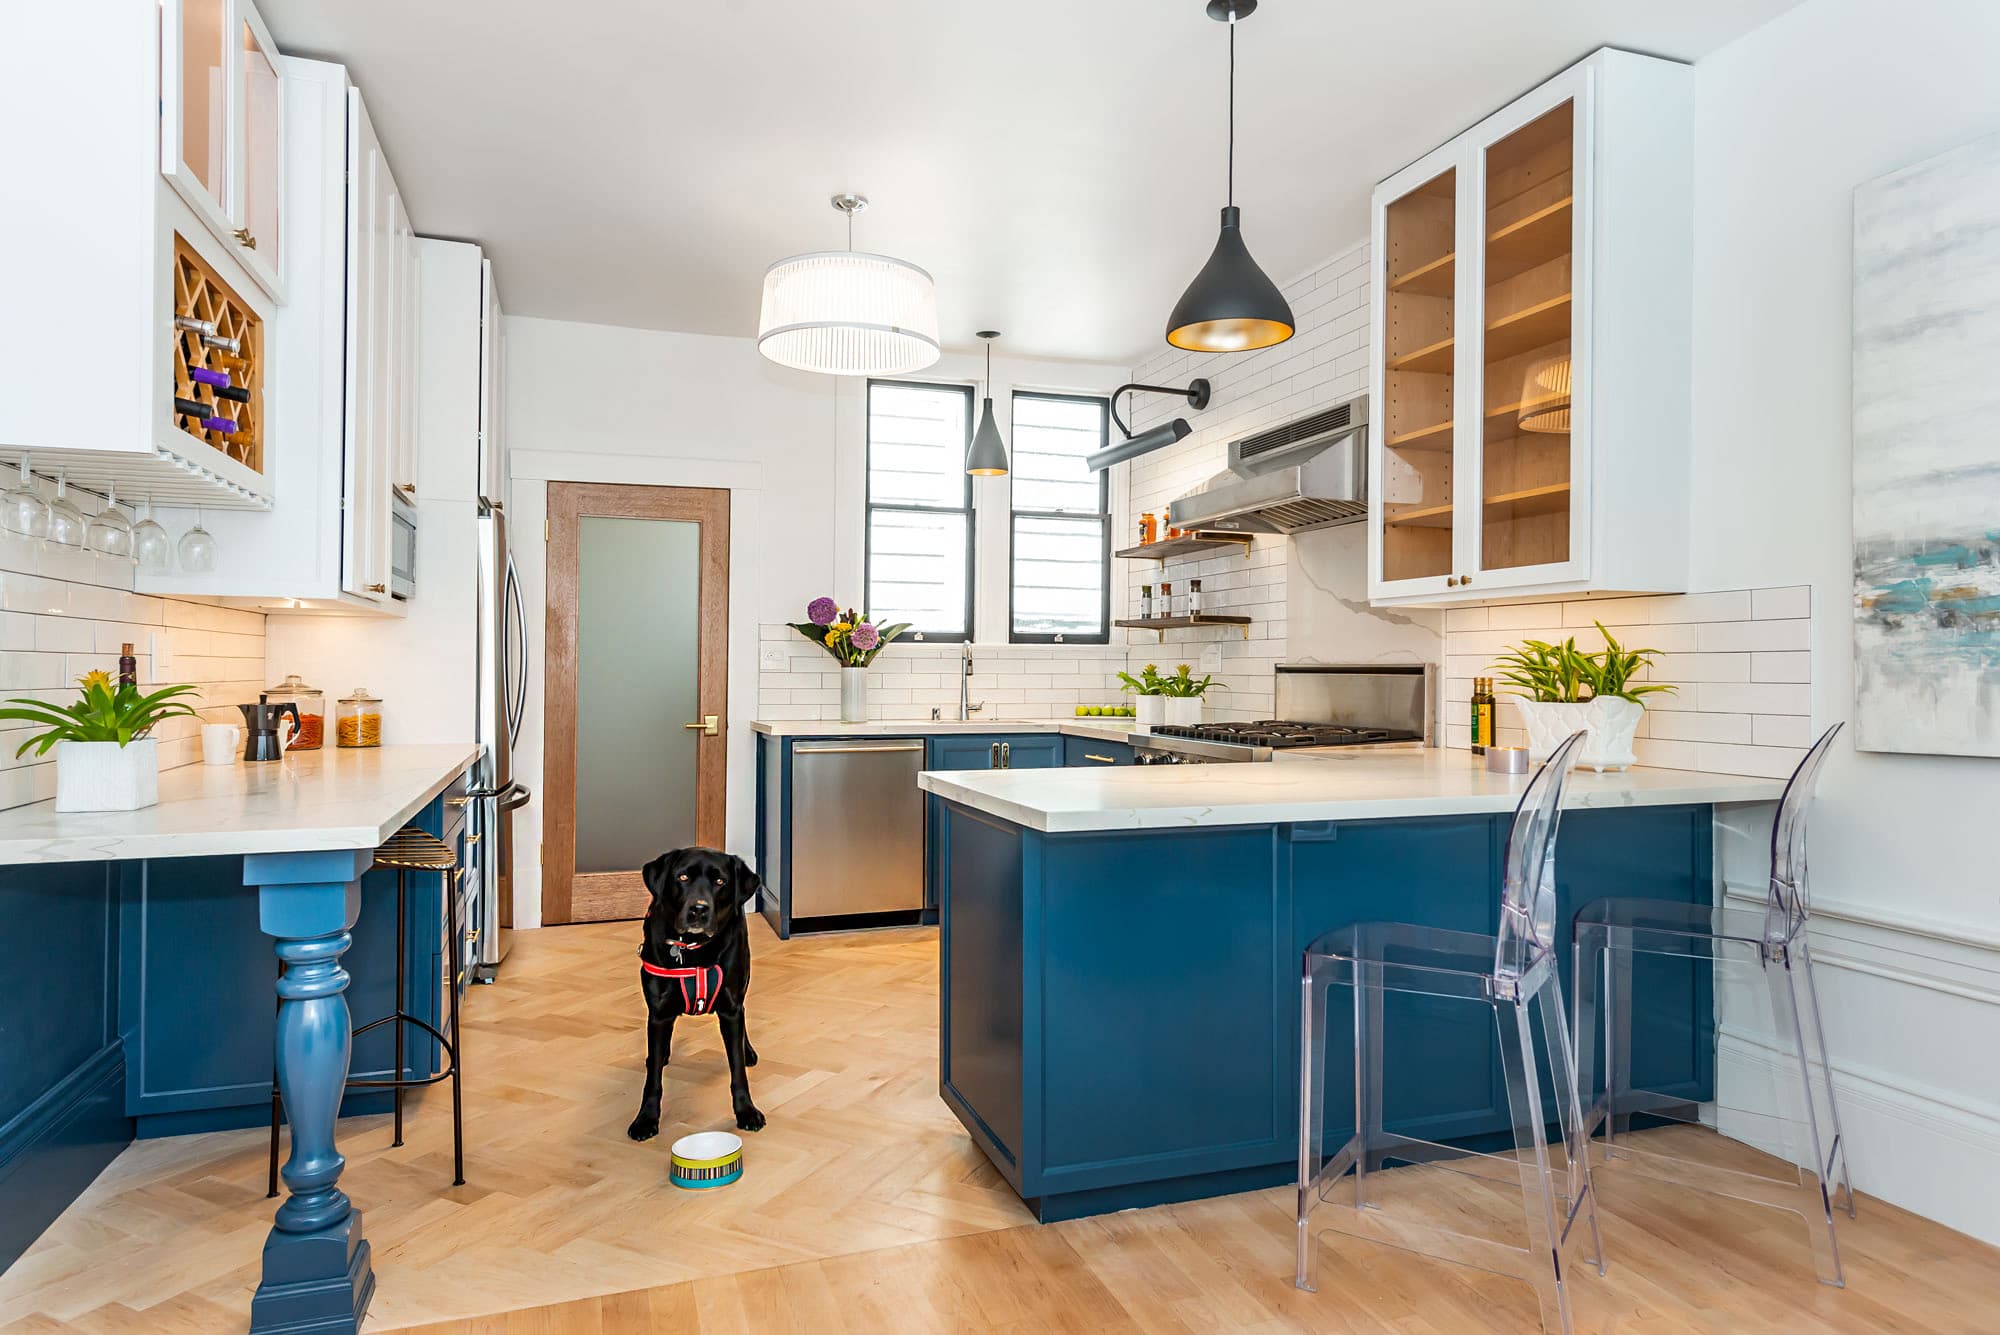 Mr. Raffi is waiting for a gourmet meal that you can prepare in 714 Page's chef-worthy kitchen. There's a 36-in Viking gas stove, hood, new 36-in stainless steel refrigerator and plenty of storage.